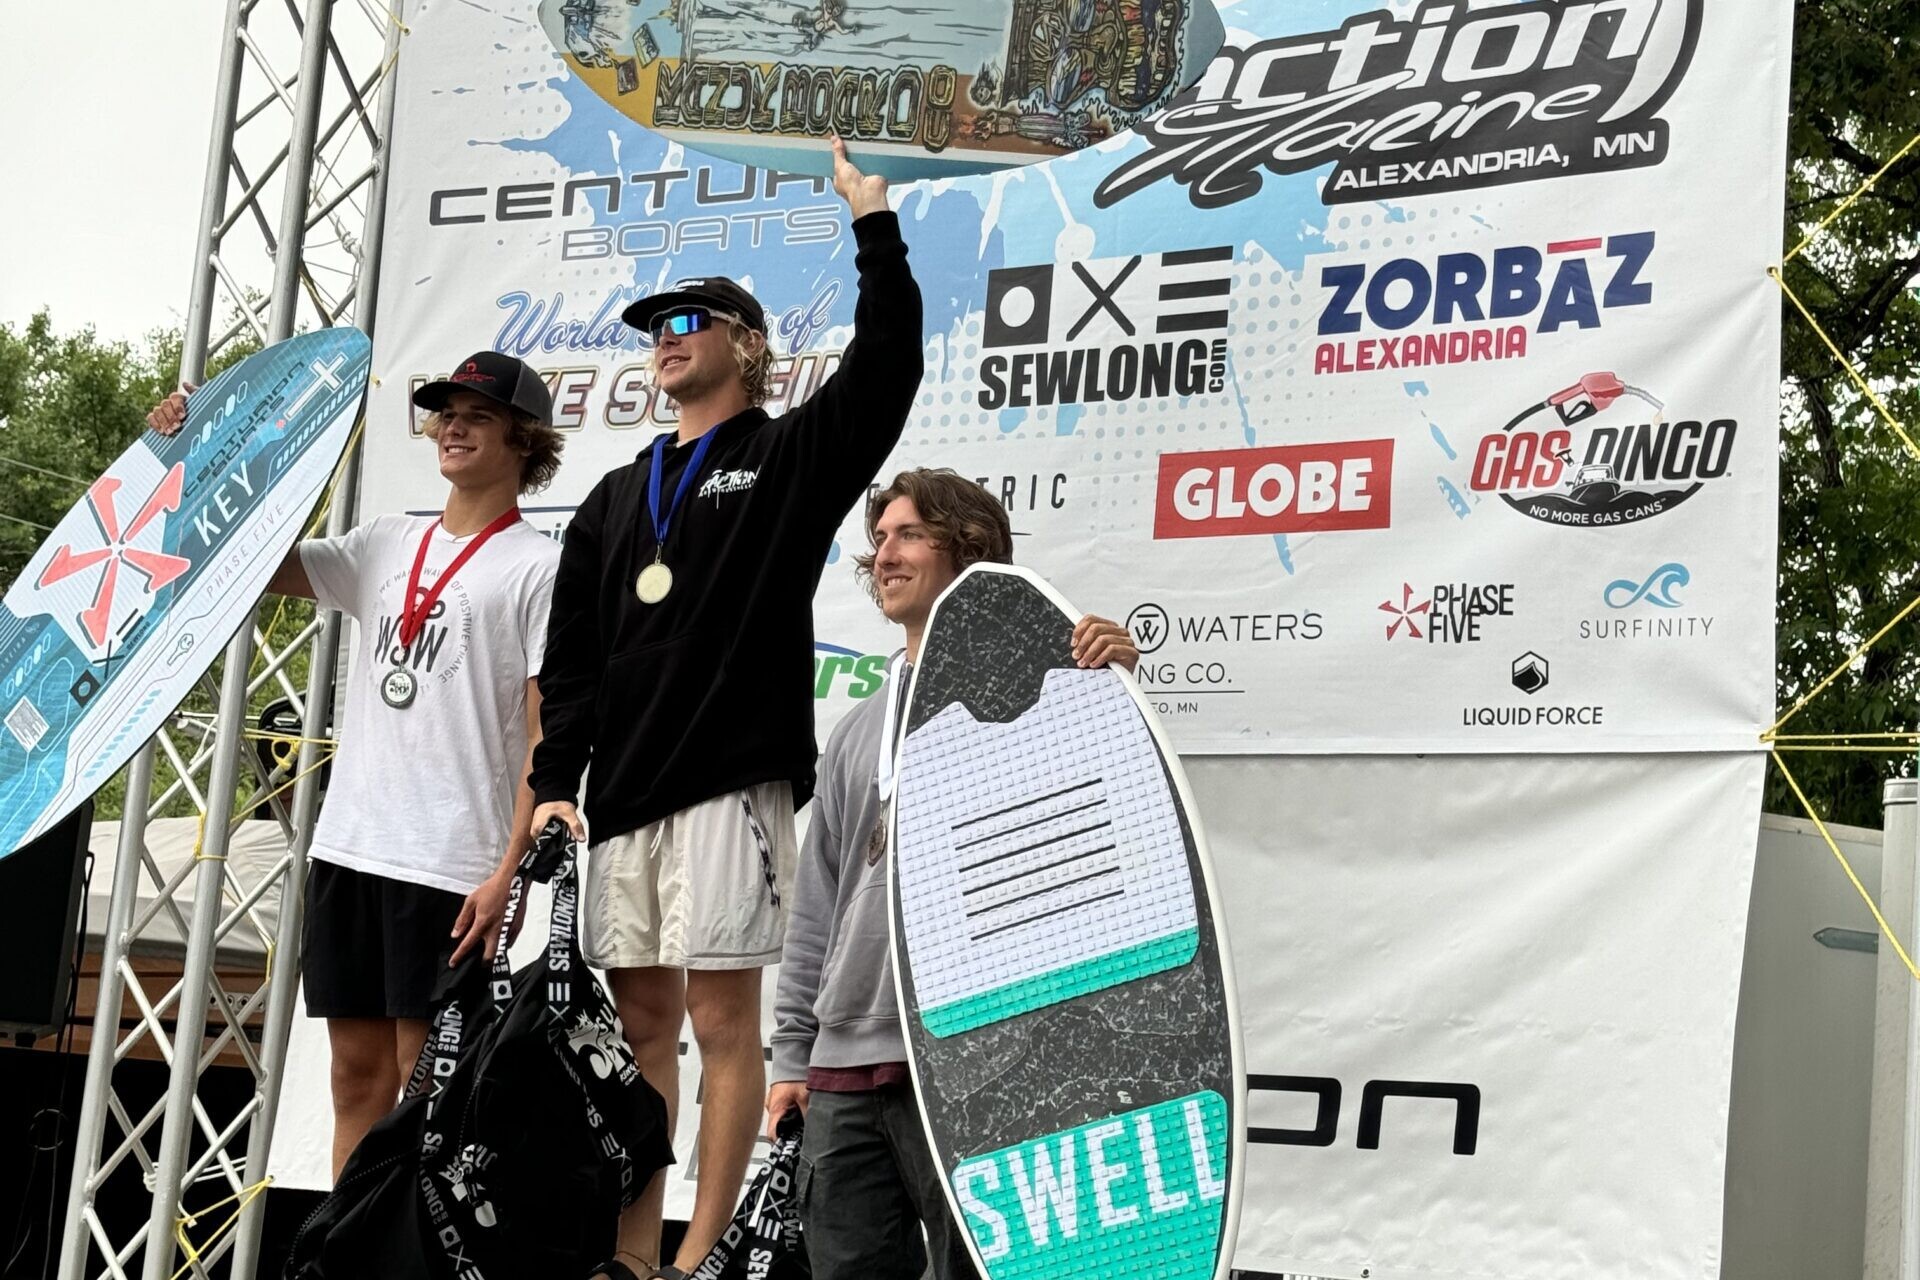 Three individuals stand on the winners' podium at a surf competition, with medals around their necks and surfboards behind them. The backdrop displays the competition's name, 